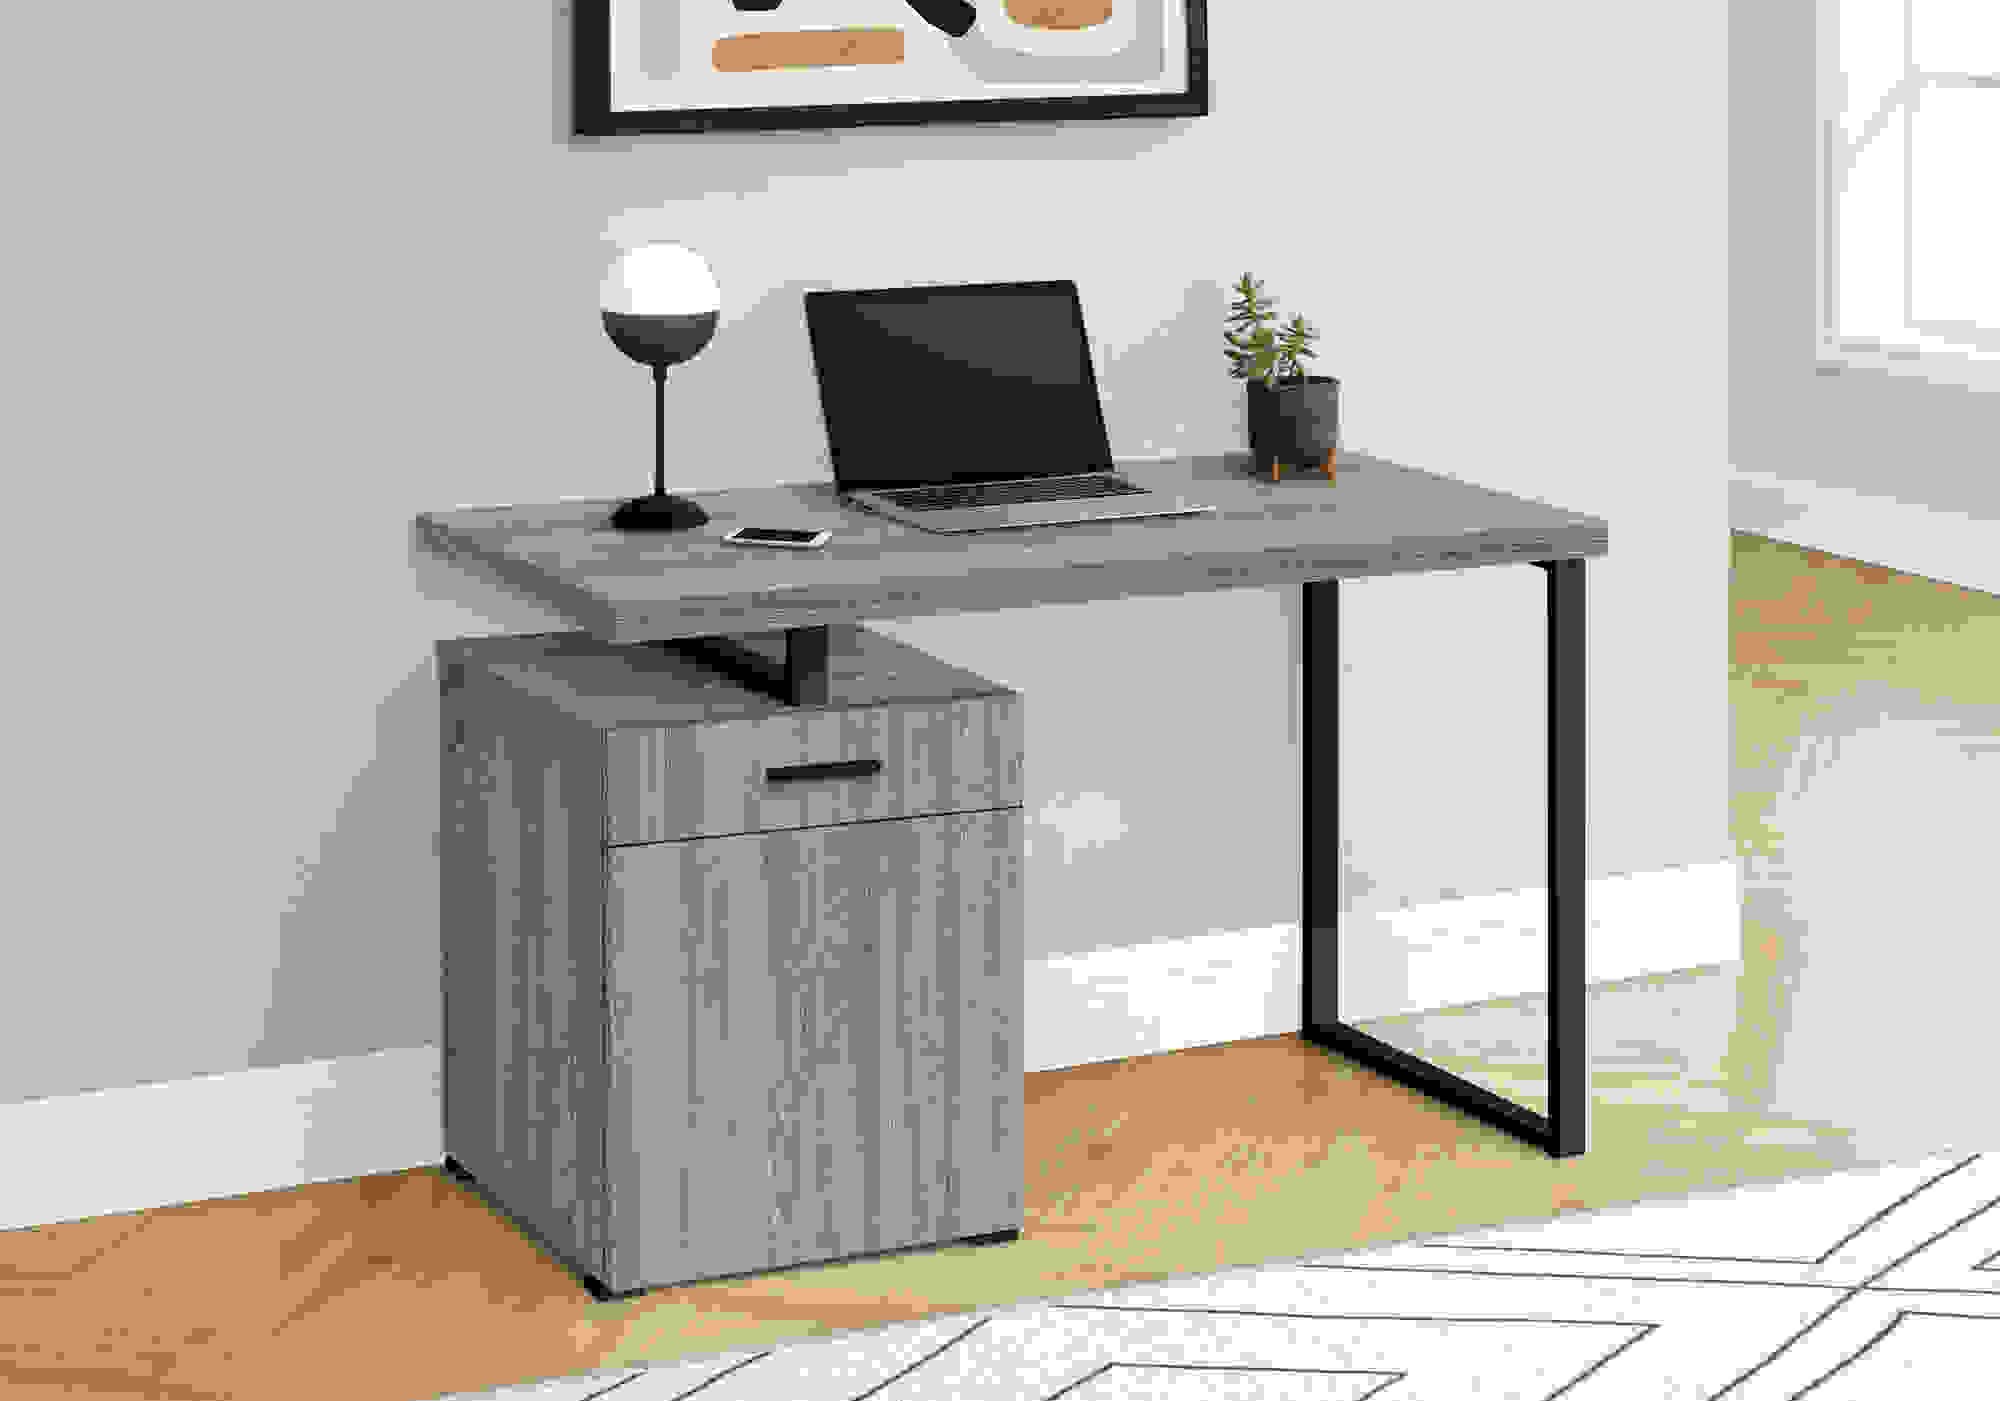 COMPUTER DESK - 48"L / DARK TAUPE LEFT OR RIGHT FACING